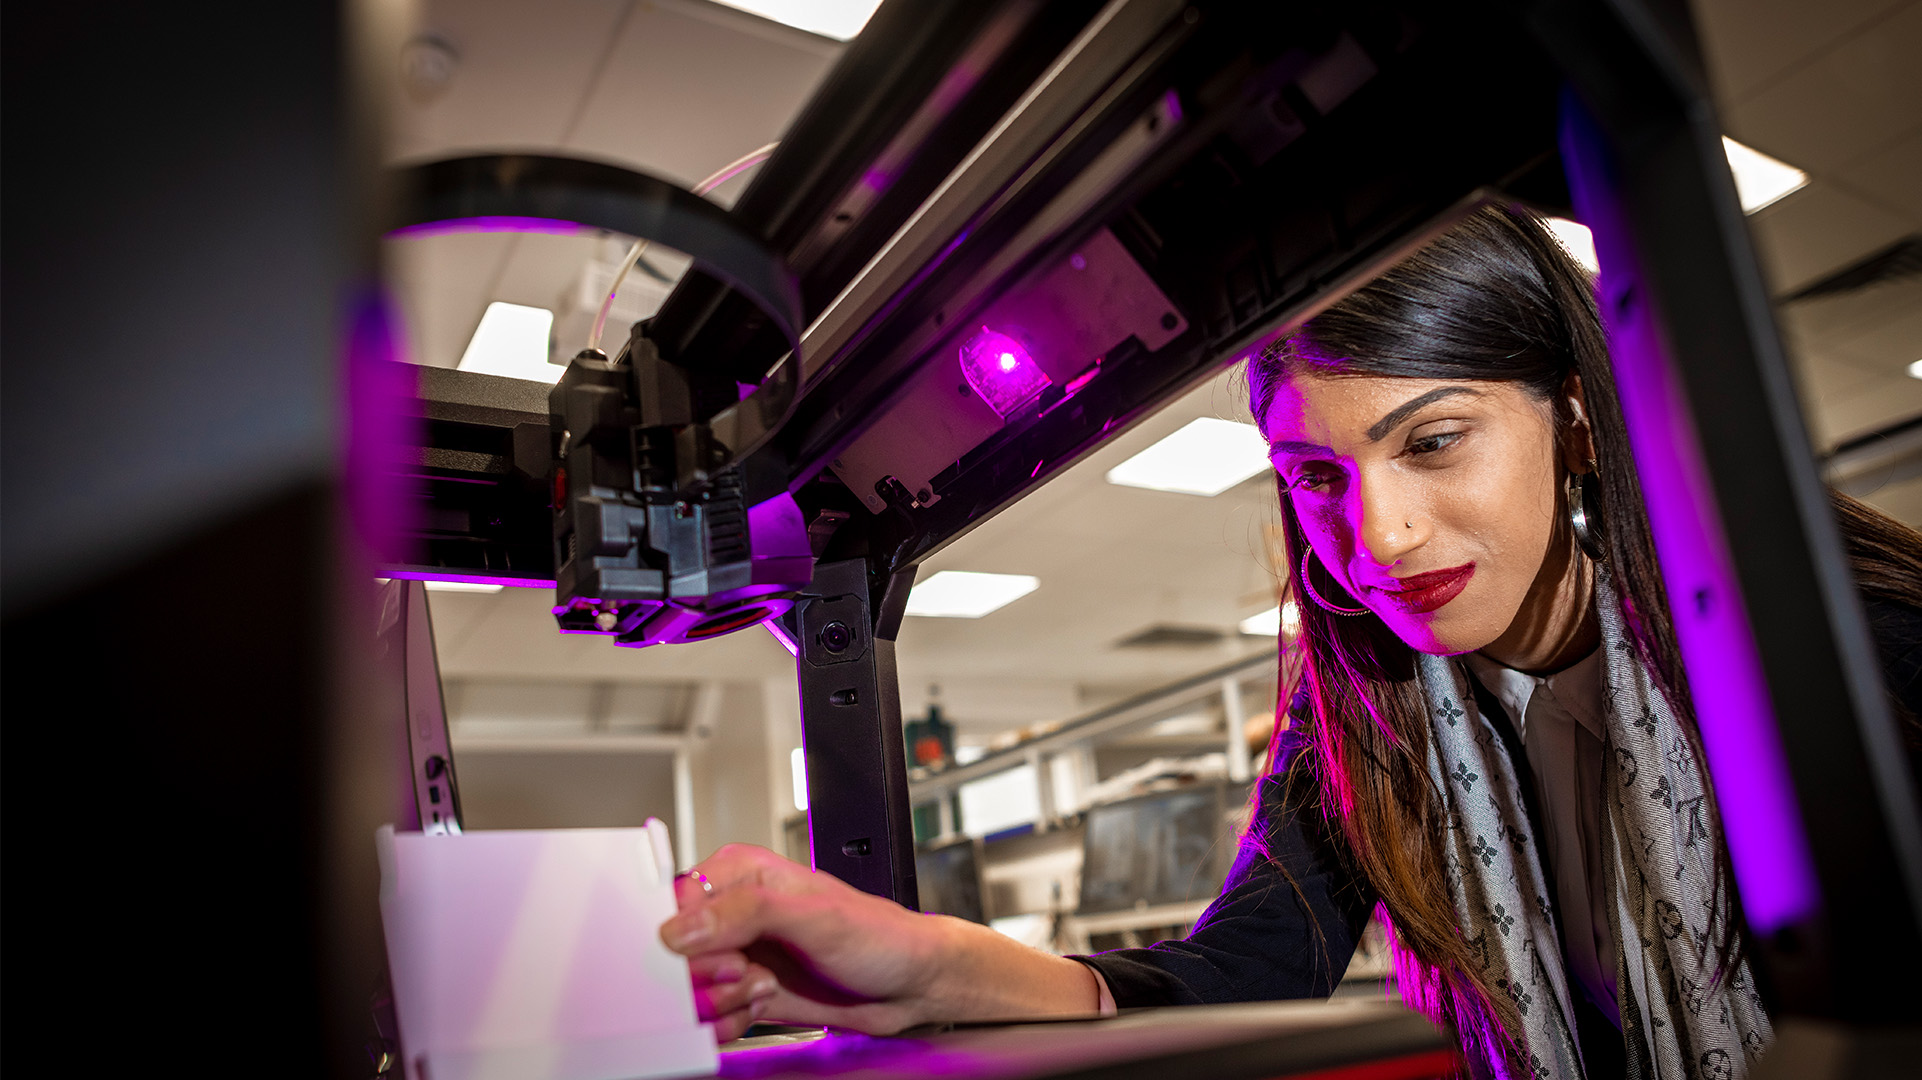 Young brunette woman looking at a 3D printer as it prints